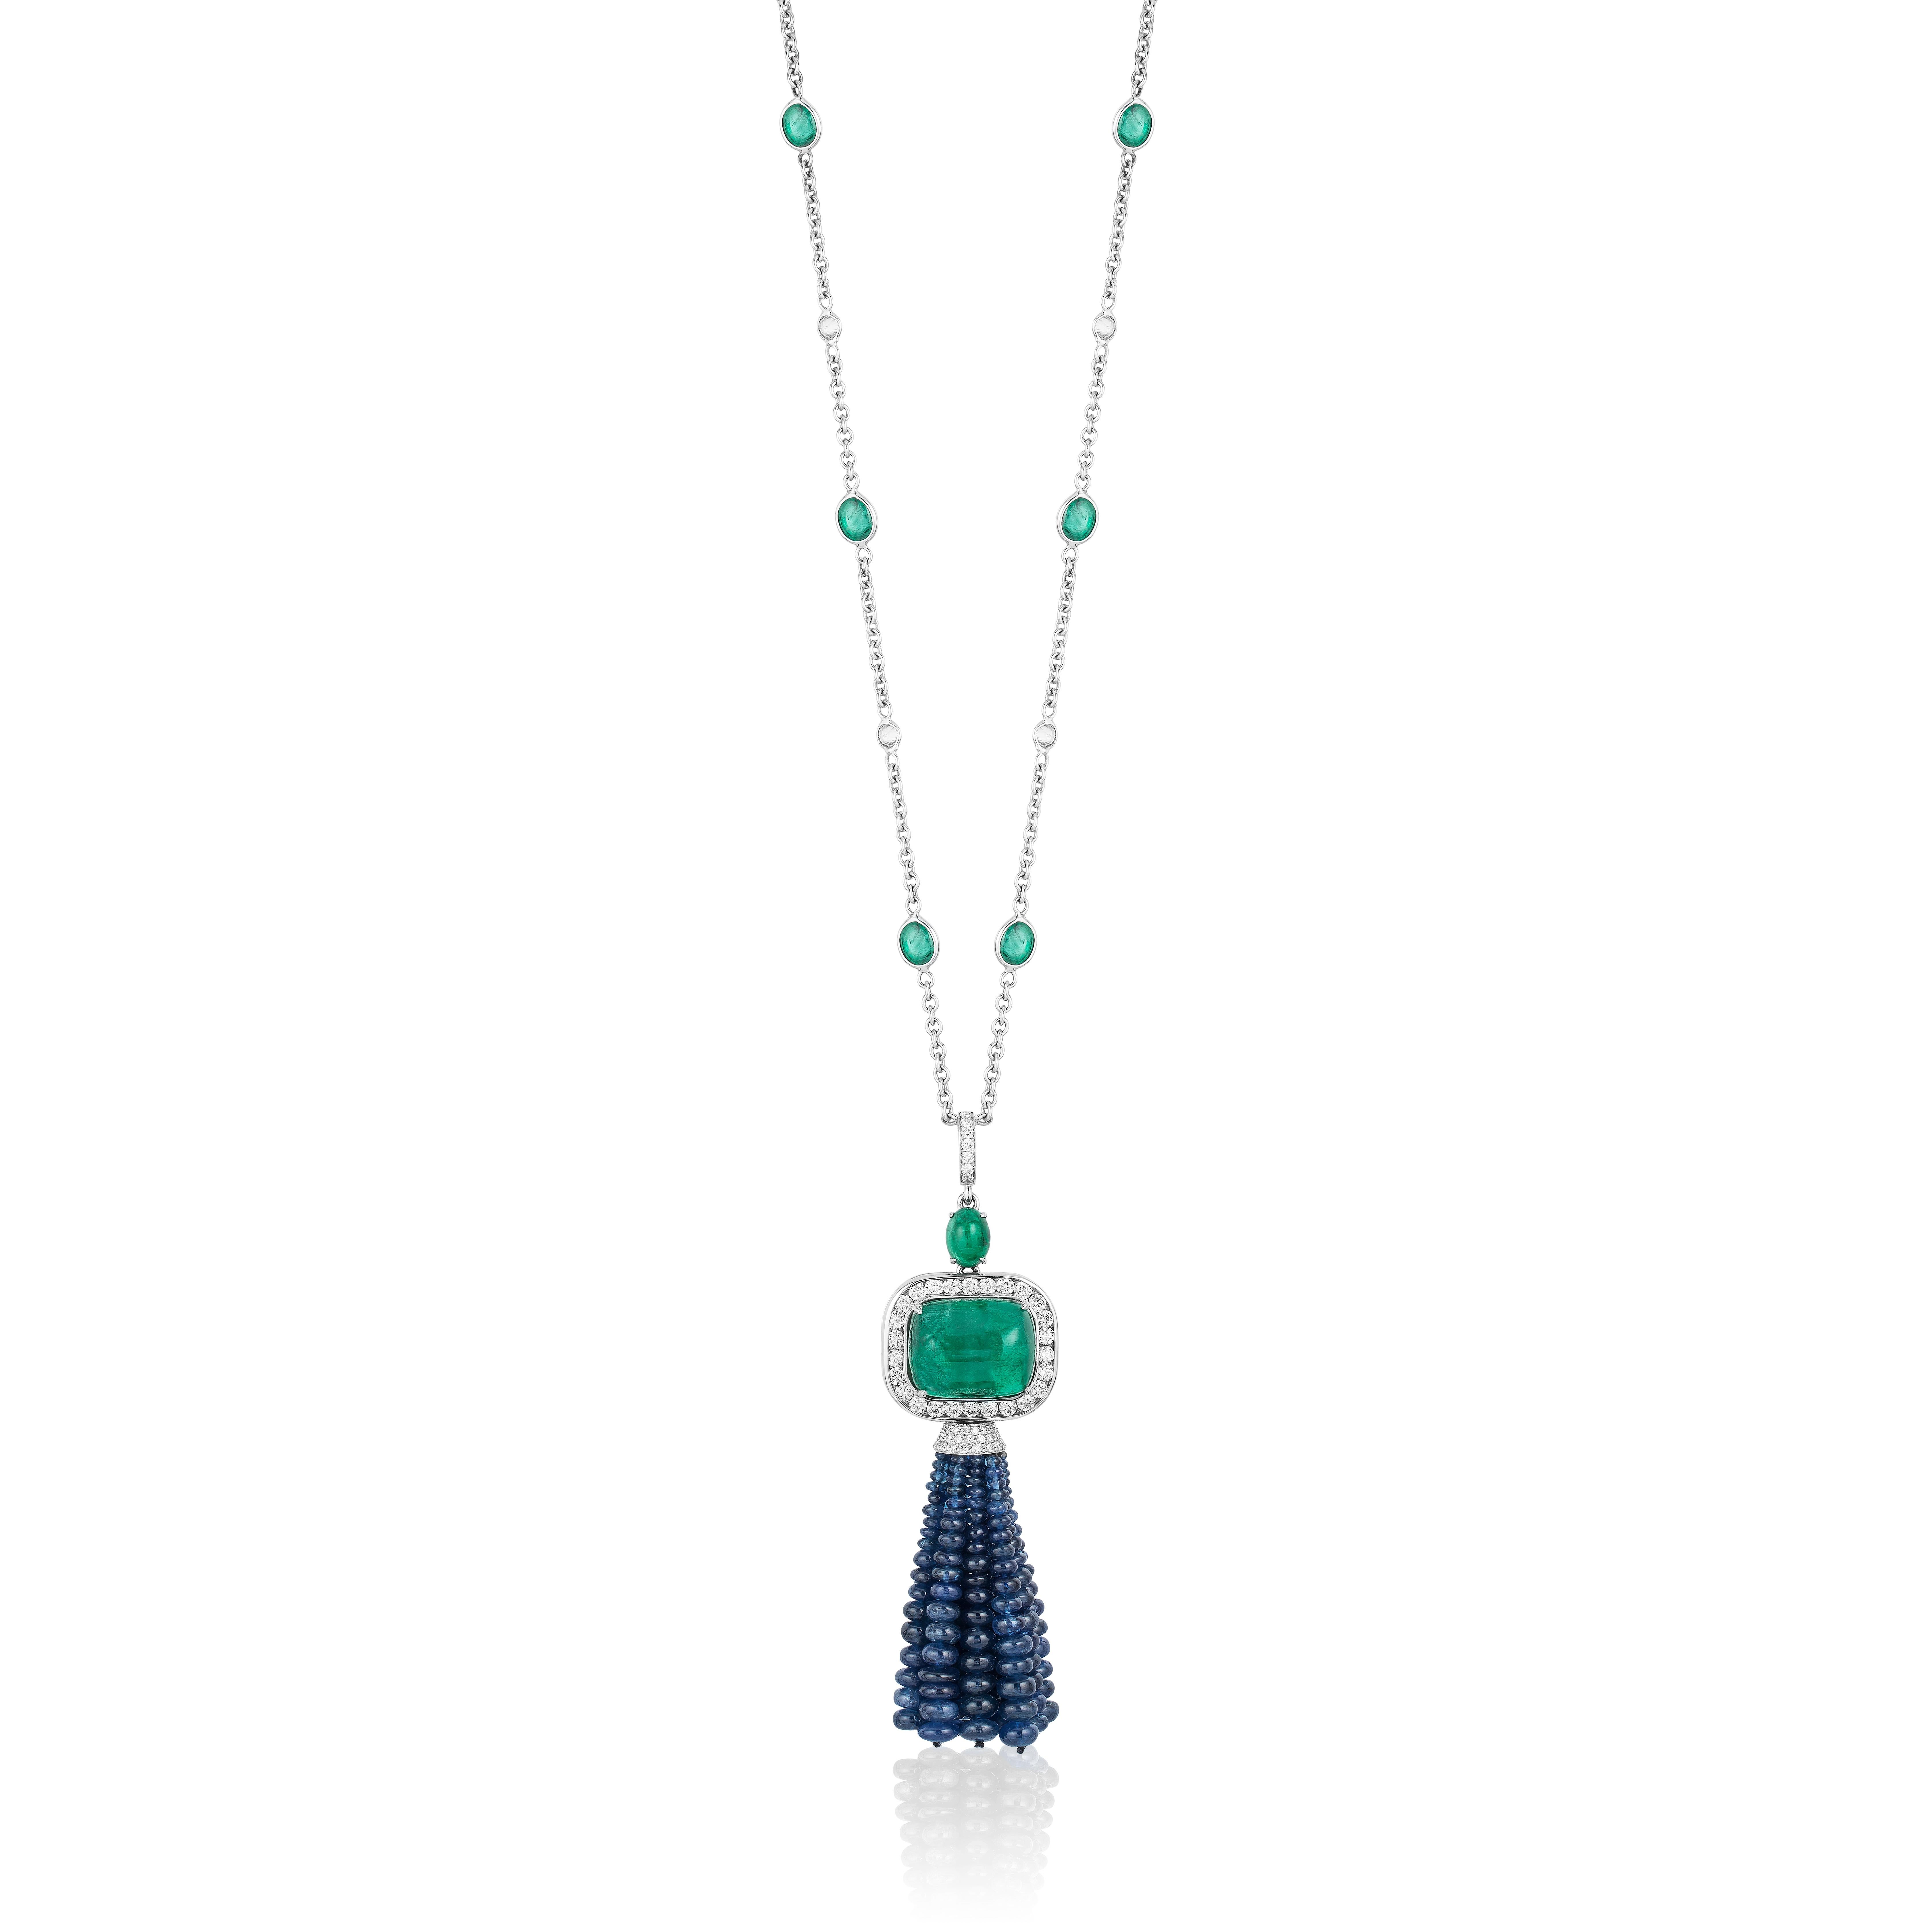 Contemporary Andreoli CDC Certified Emerald Sapphire Cabochon Bead Chain Tassel Necklace 18K